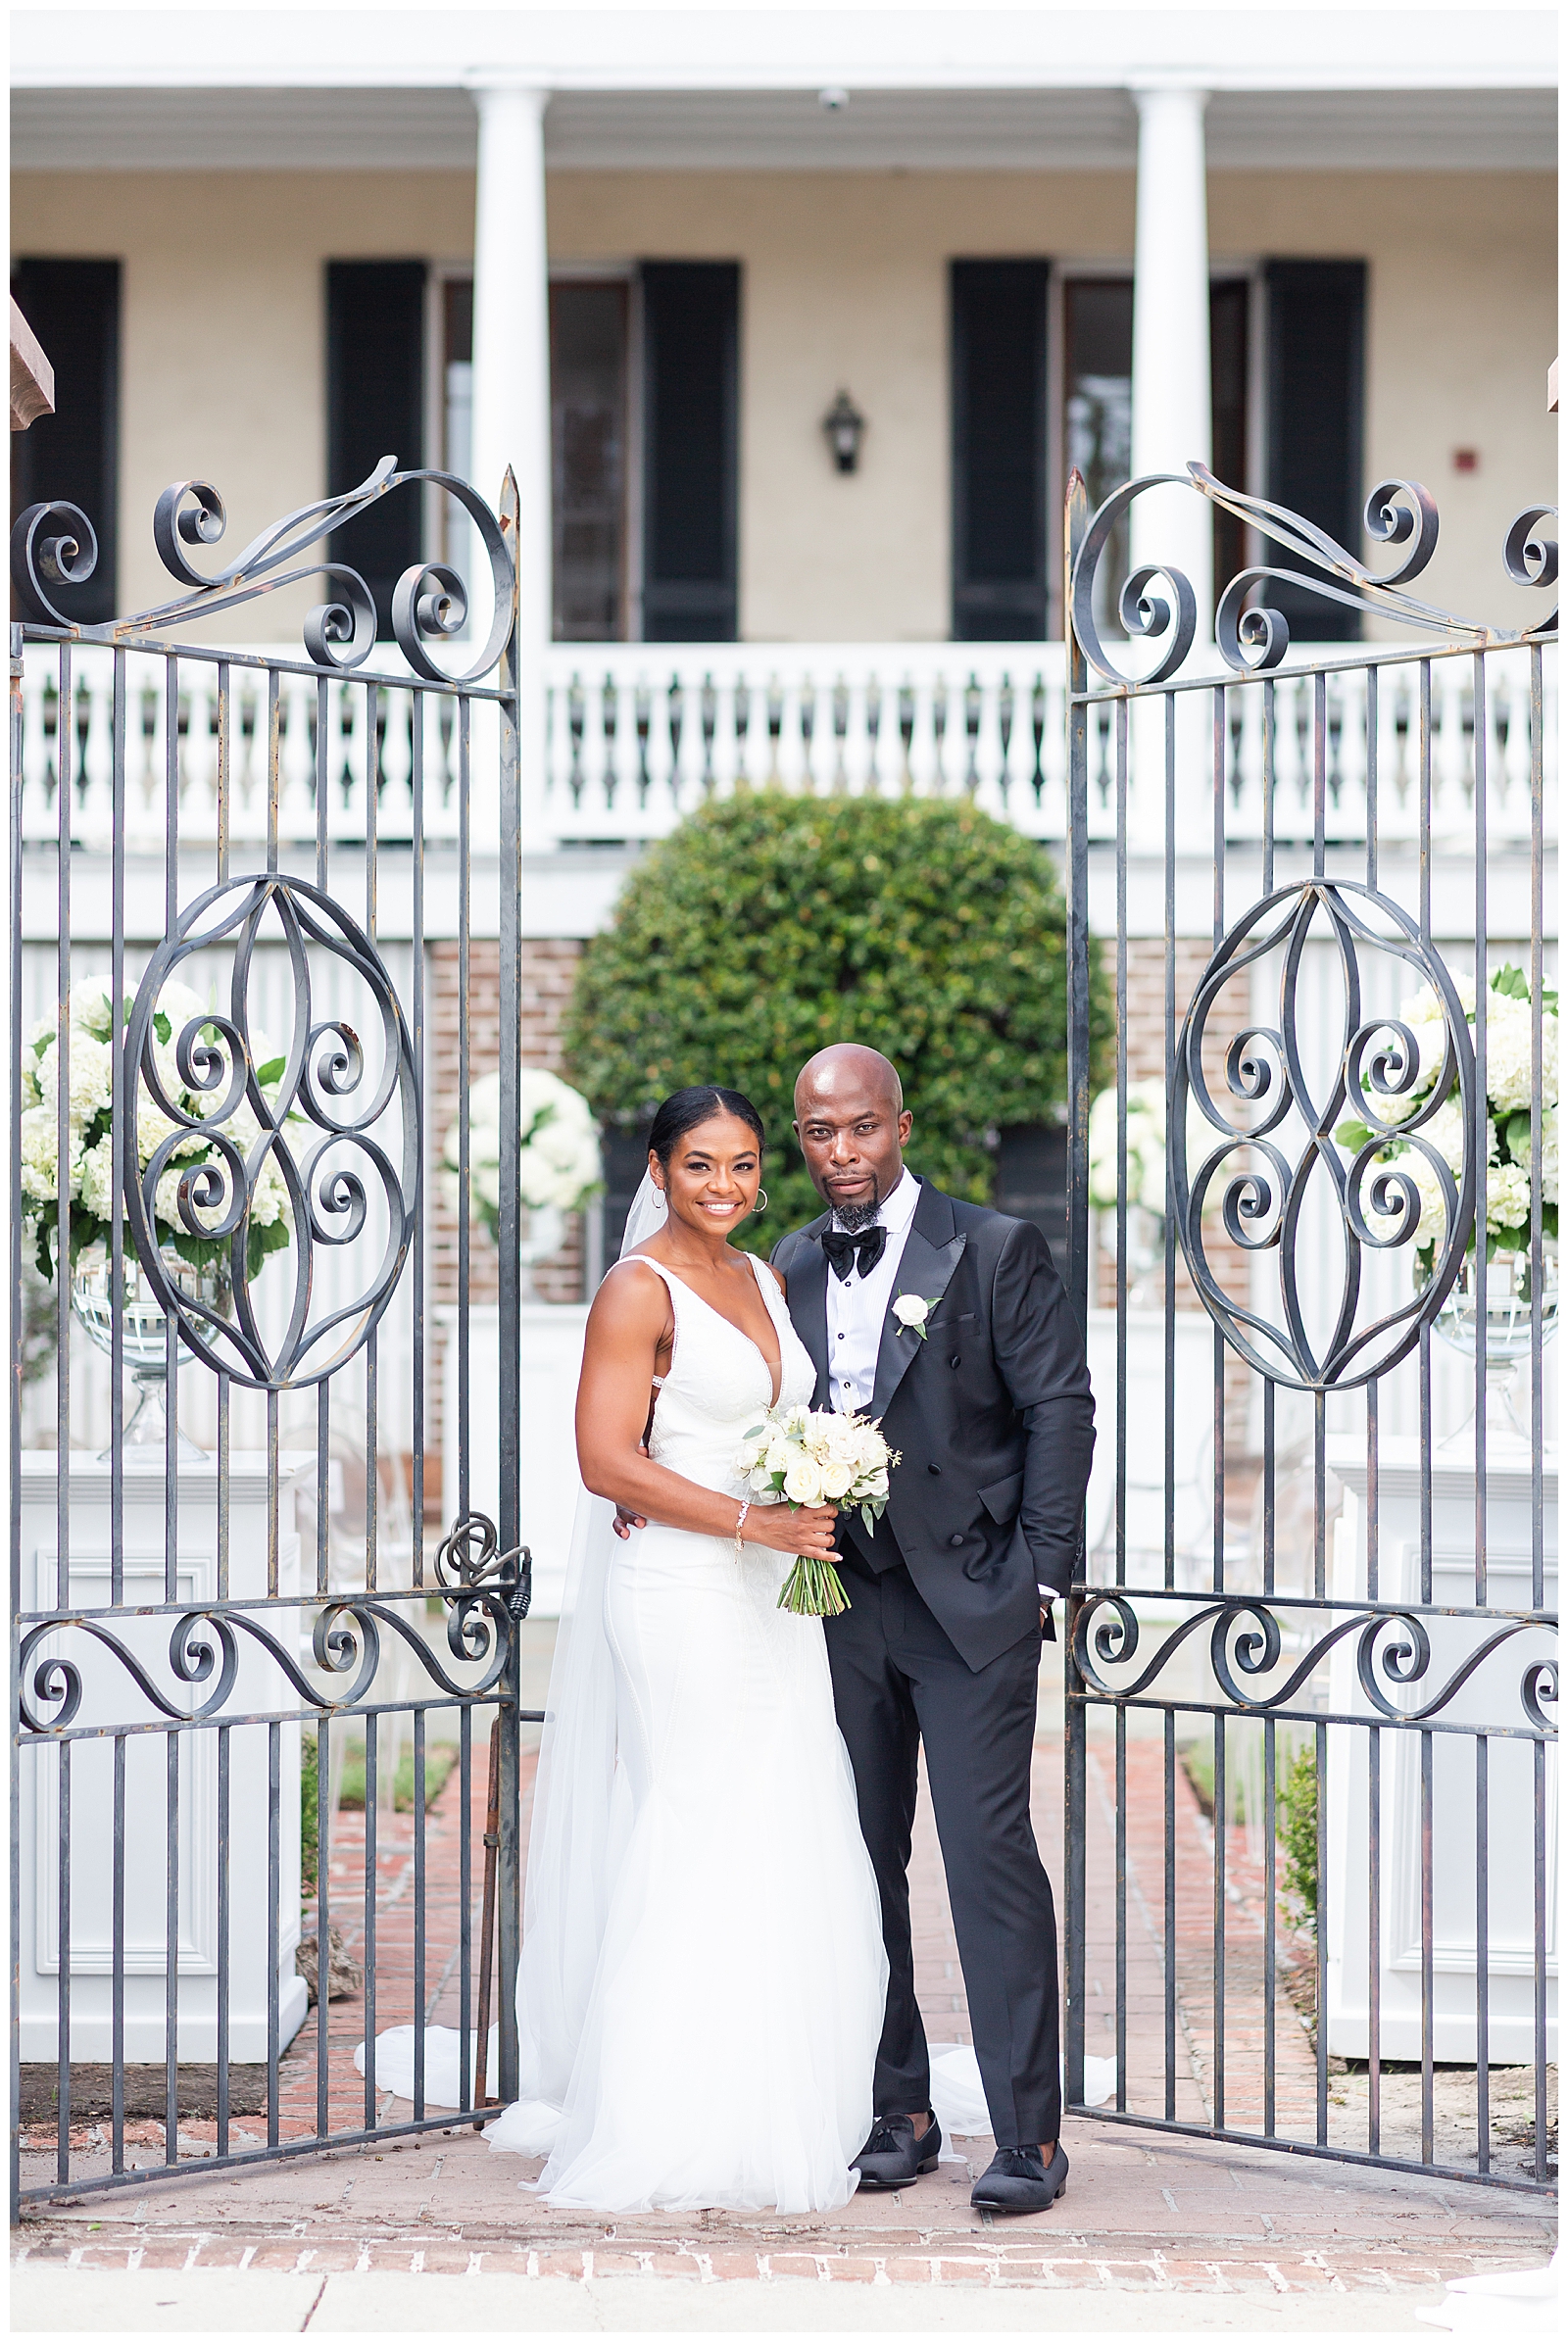 Charleston gate with bride and groom